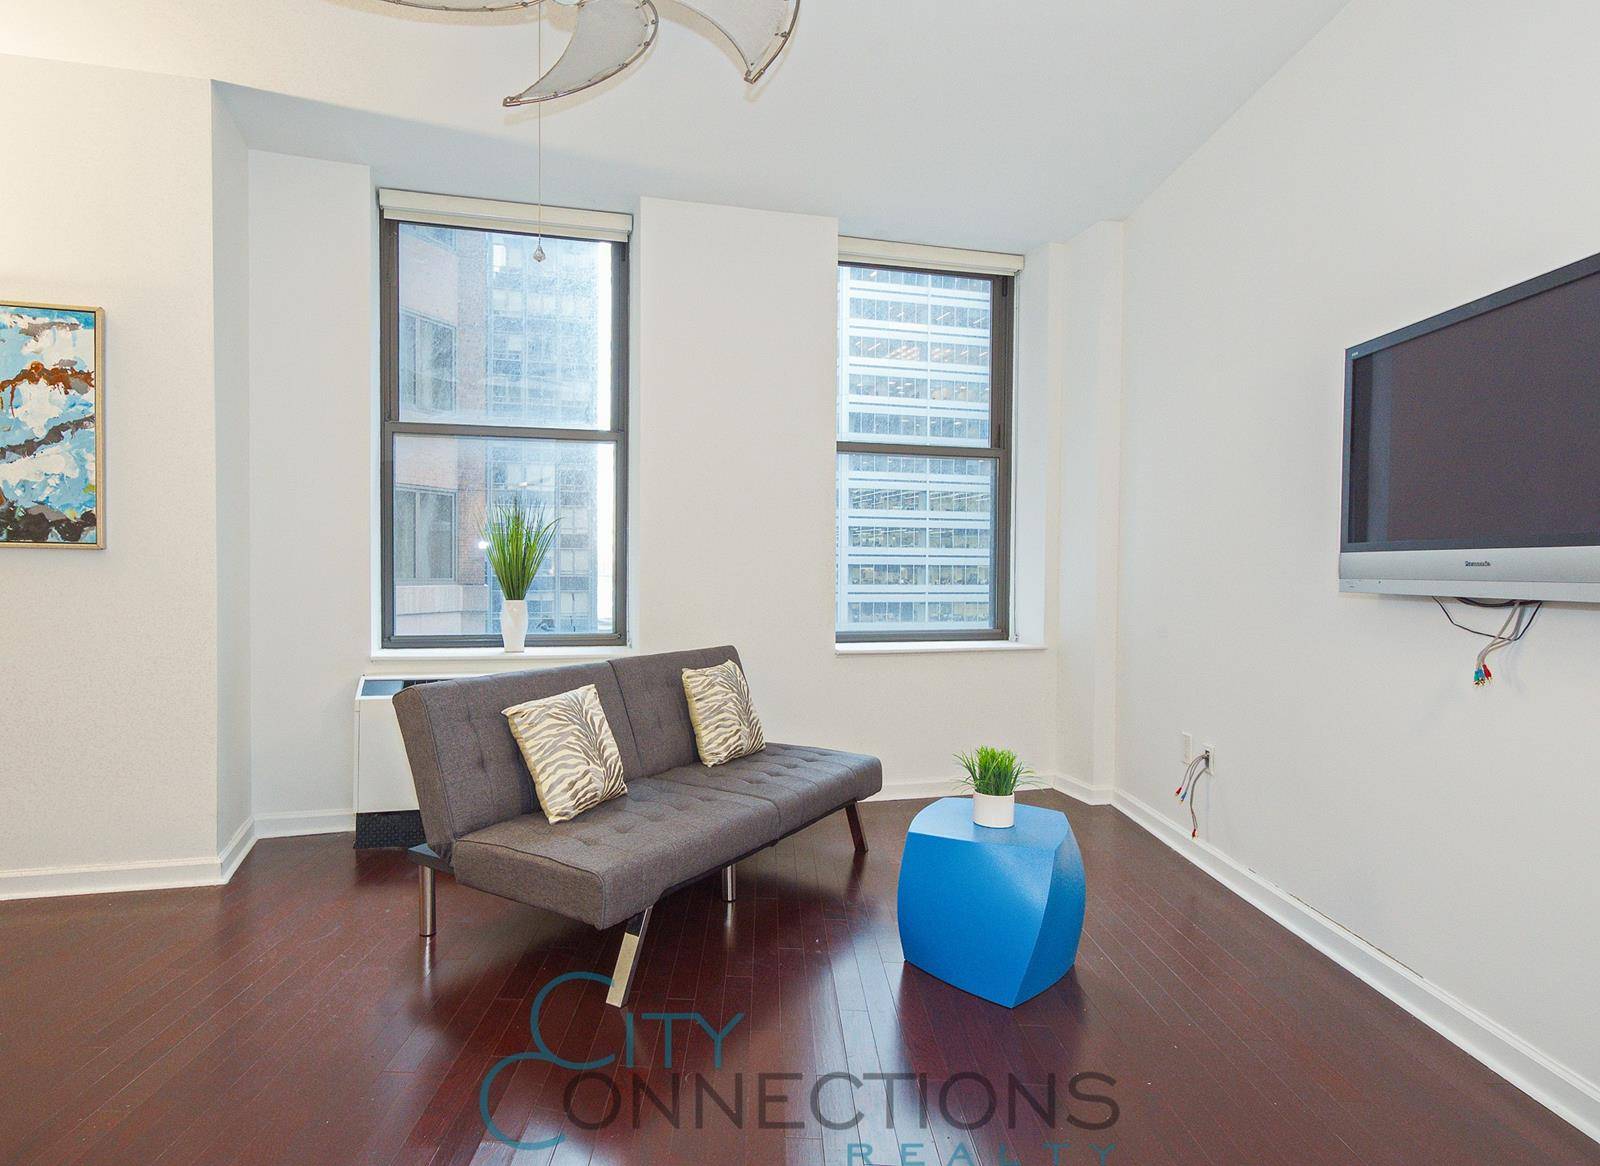 Fabulous apartment ! Highly livable alcove studio with high ceilings almost 10 feet !